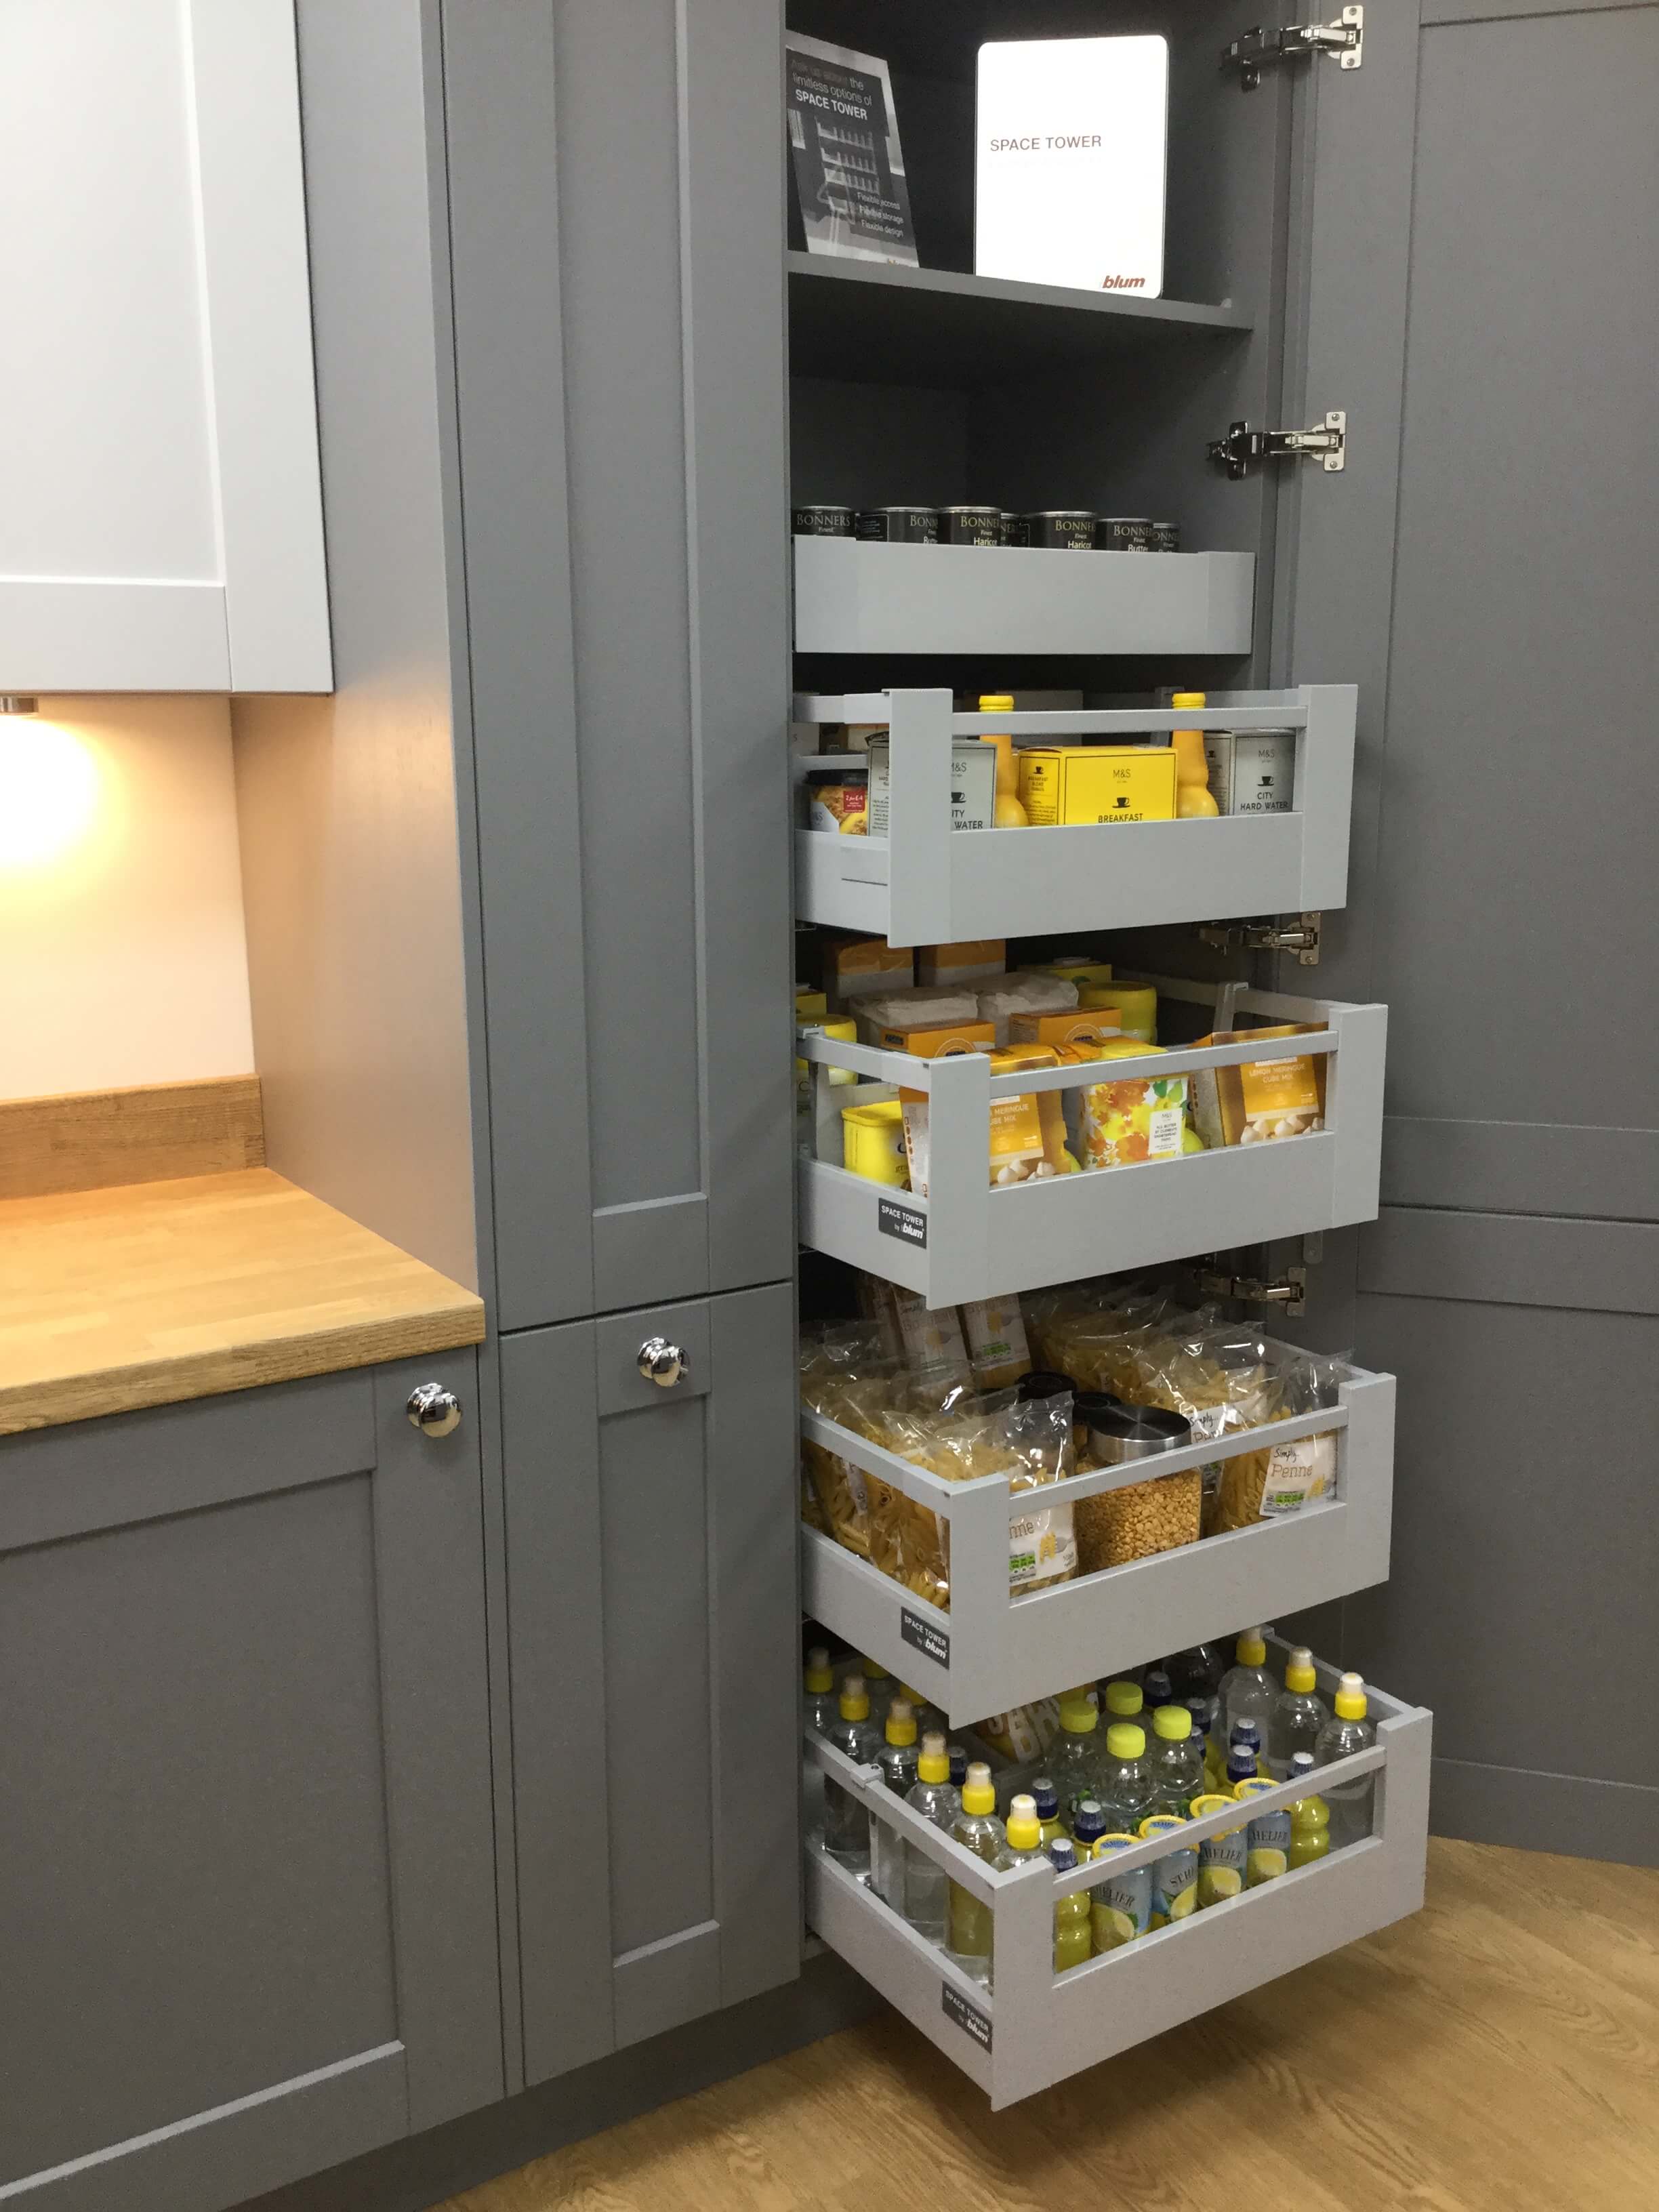 SPACE TOWER Bespoke Affordable Kitchens 3